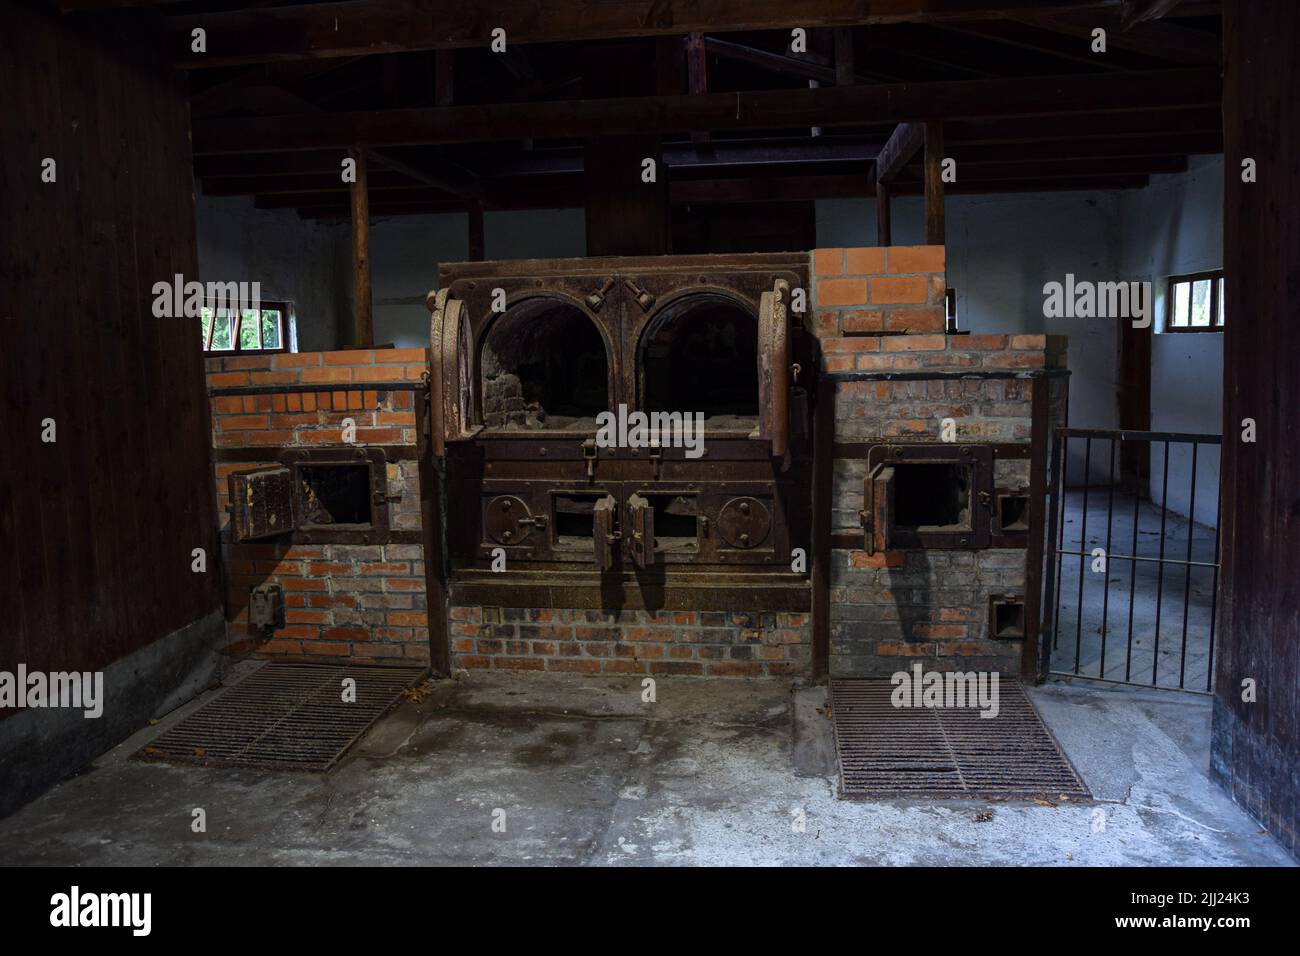 Dachau concentration camp in Germany Stock Photo